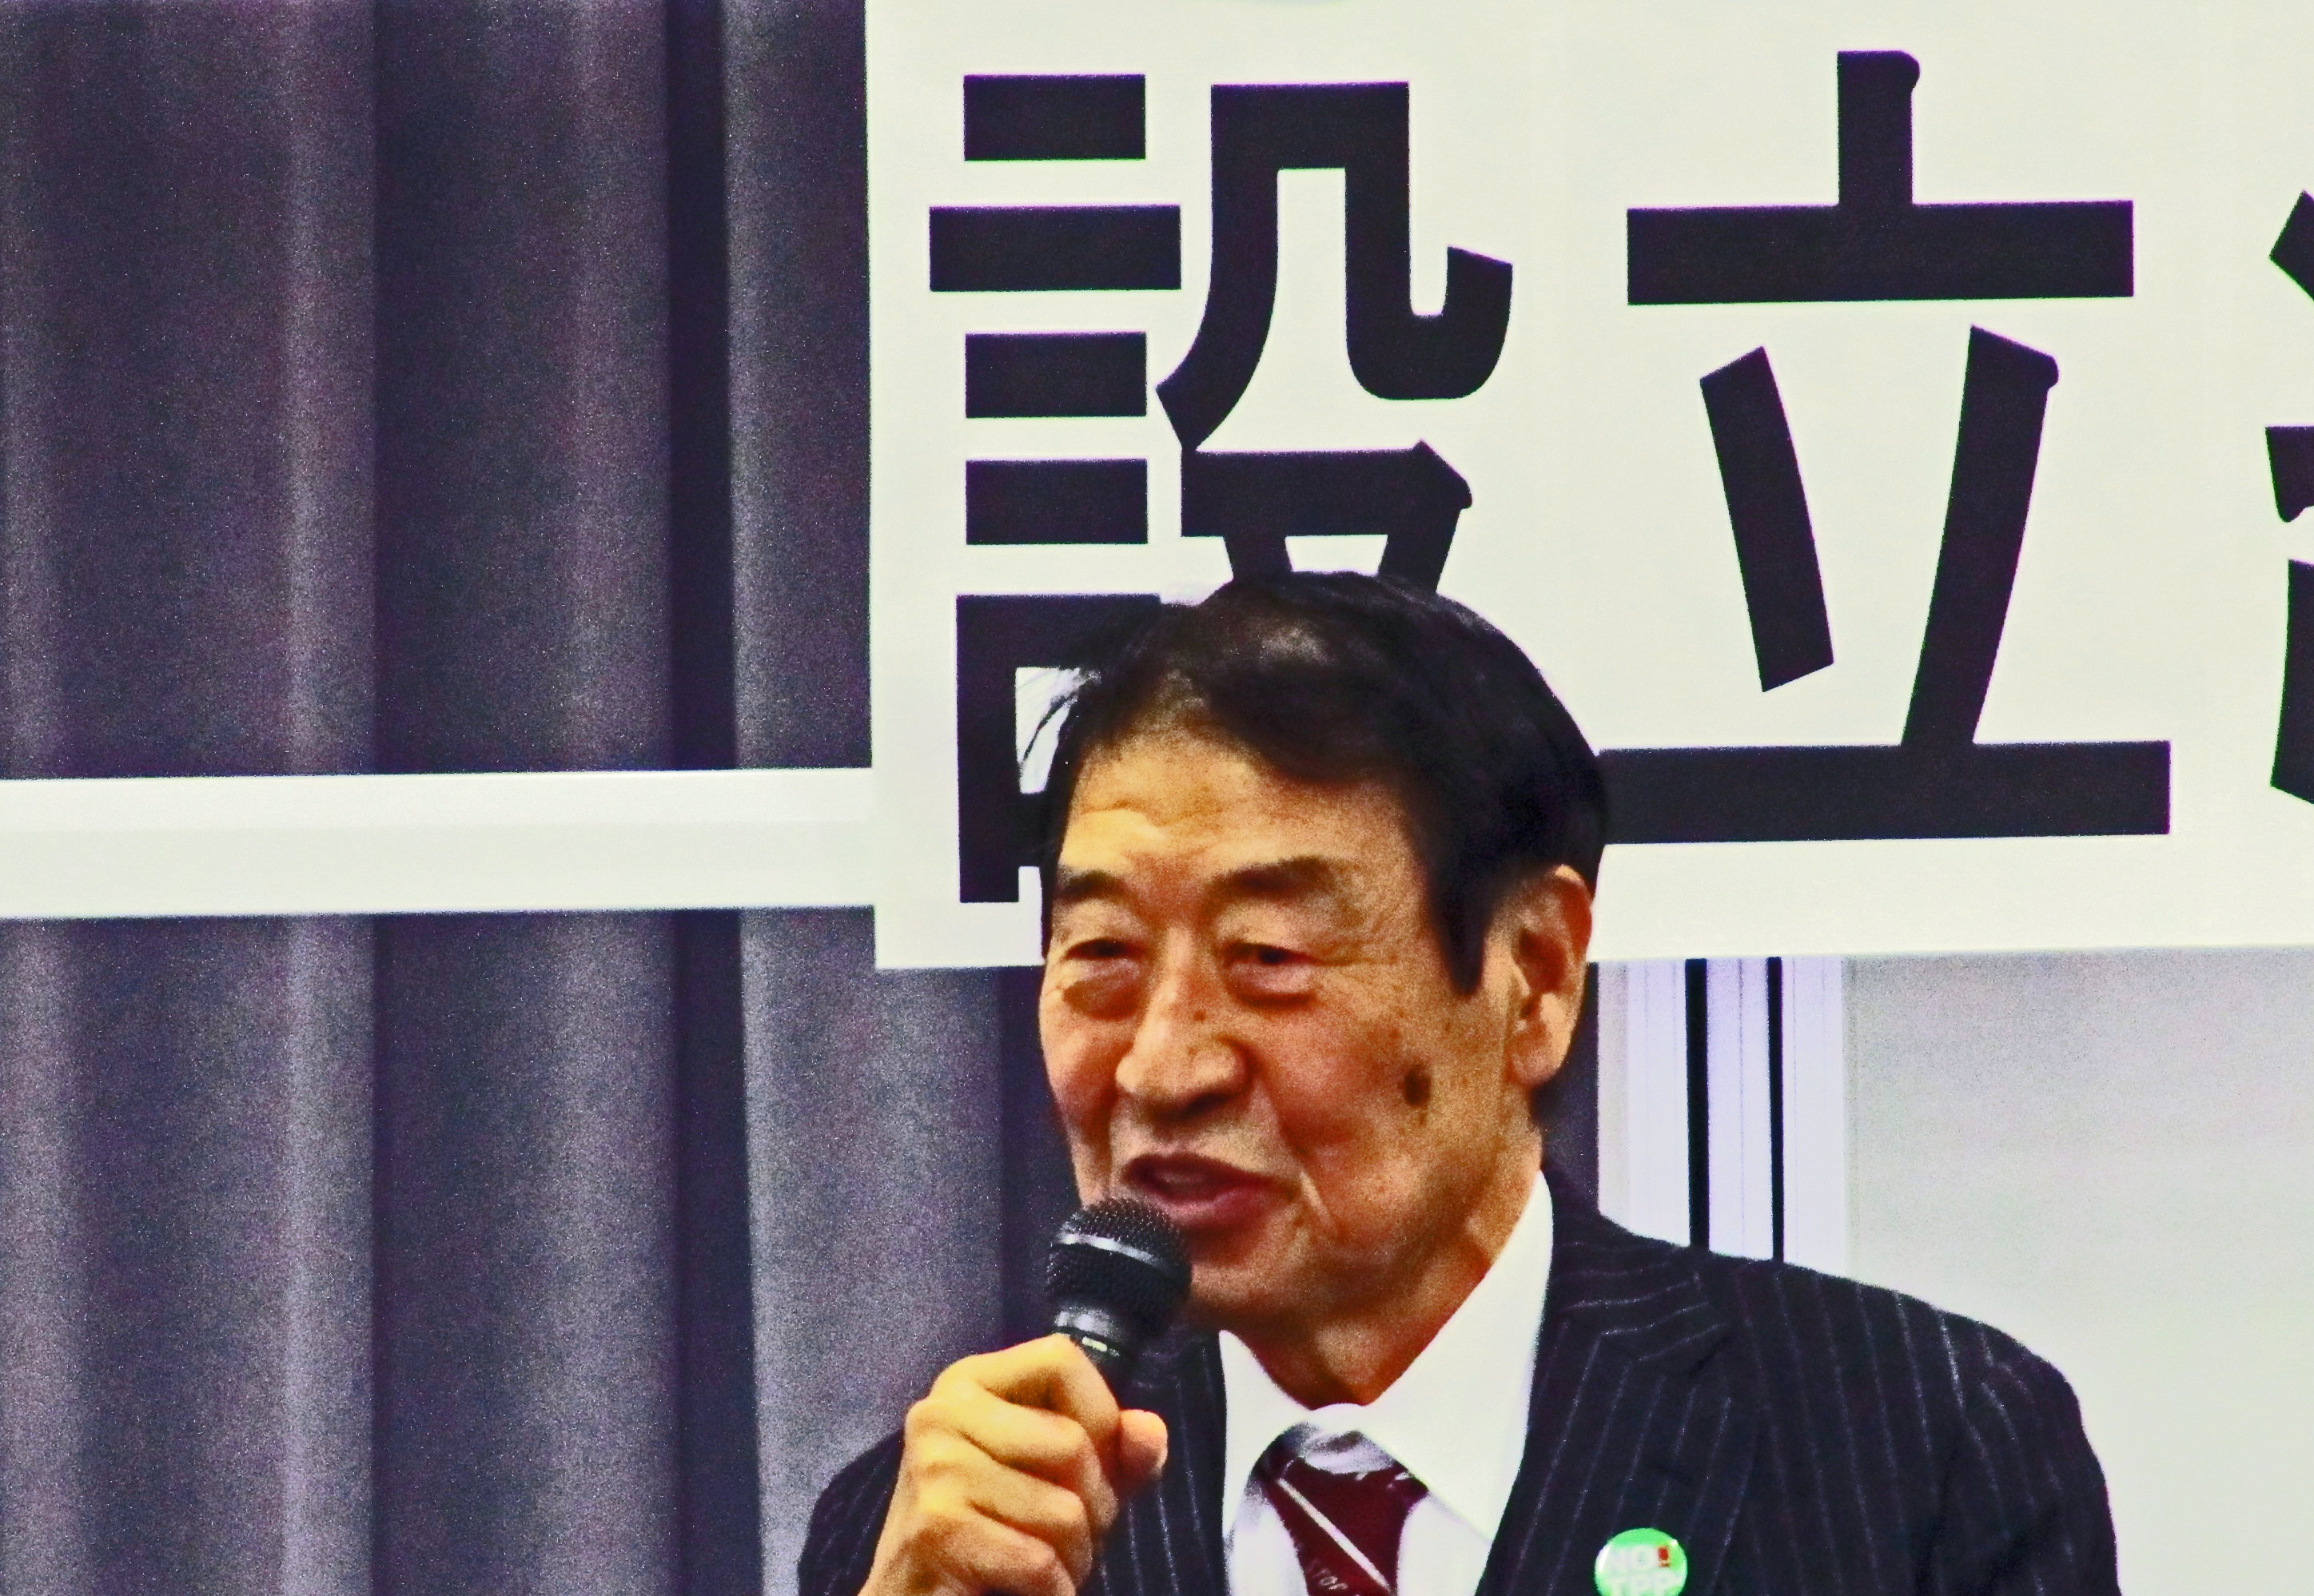 Mr. Masahiko Yamada was Japanese Minister of Agriculture, Forestry and Fisheries of the Naoto Kan regime, and he is a truthfully patriotic Japanese politician who fights against neo-liberalist regime of Shinzo Abe. Photographed and edited by the Japanese filmmaker, Corman Award Winner Ryota Nakanishi.